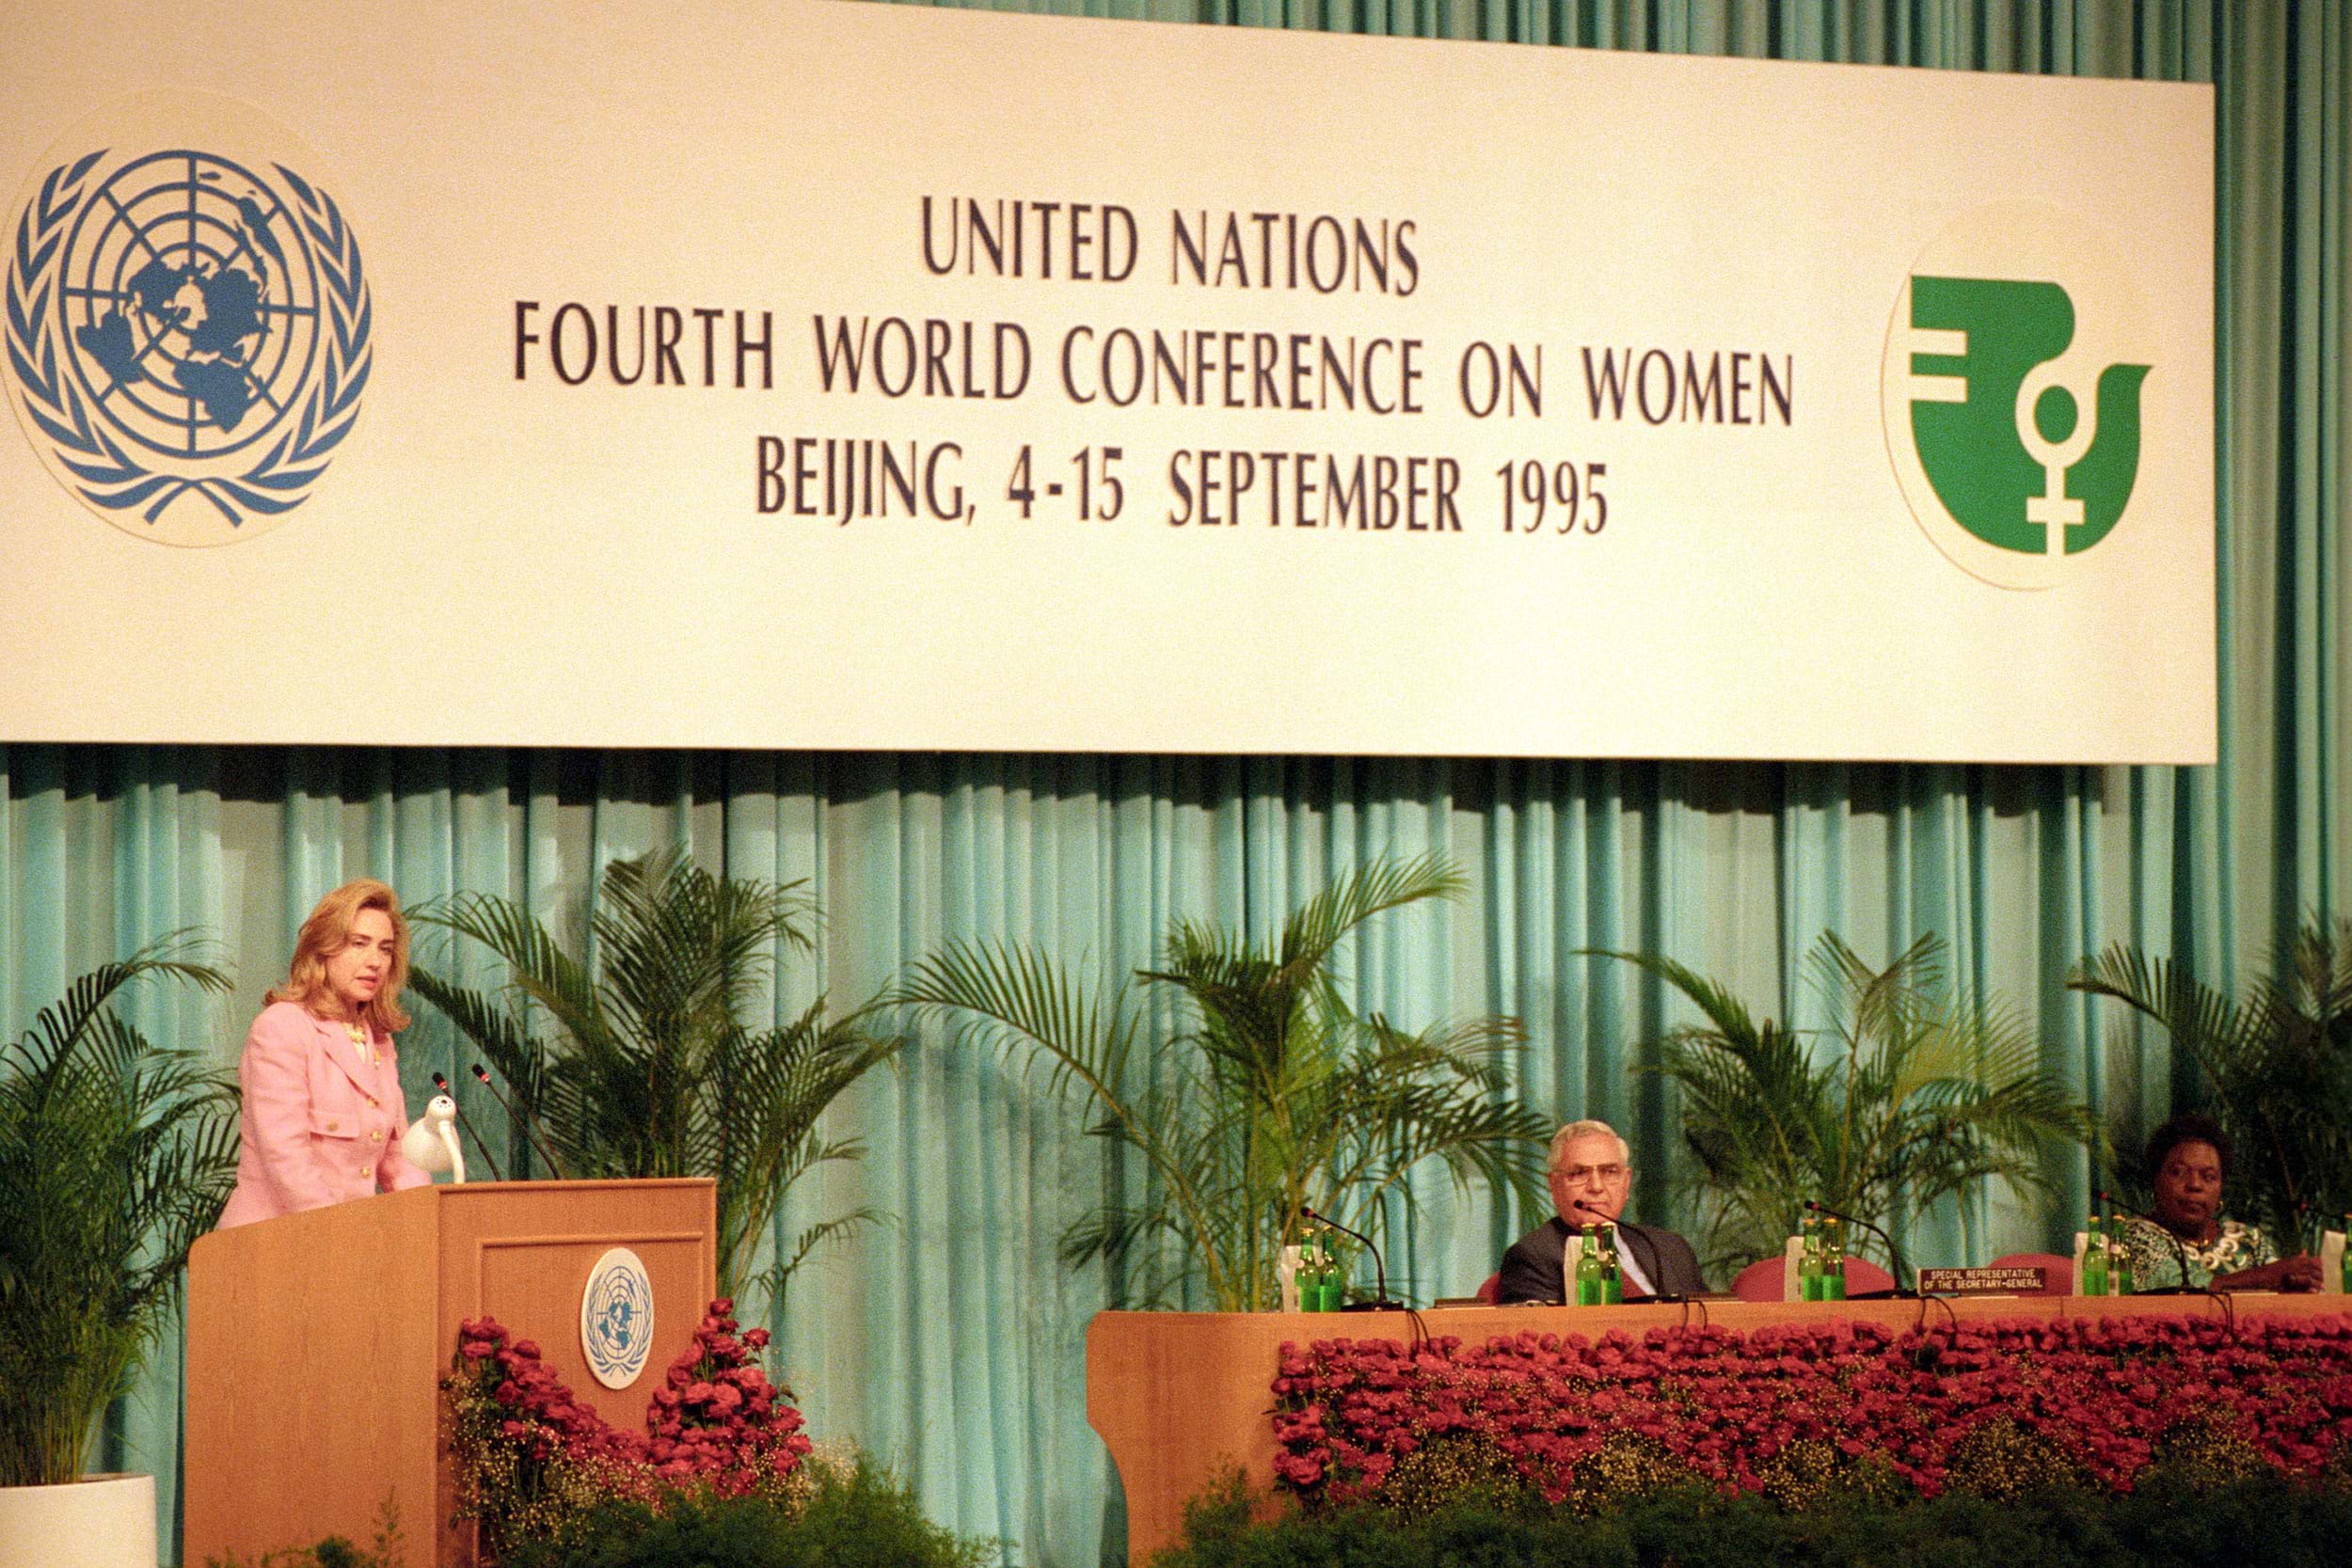 Hilary Clinton speaks on stage at a podium under a sign that reads "United Nations Fourth World Conference on Women, Beijing, 4-15 September 1995".